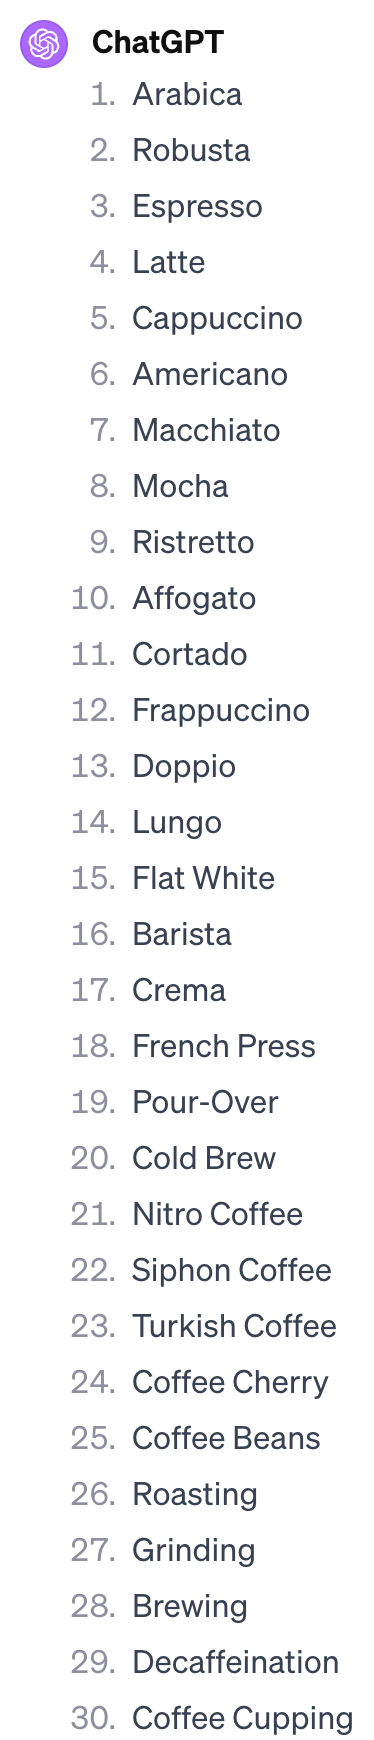 List of terms related to coffee, suggested by ChatGPT